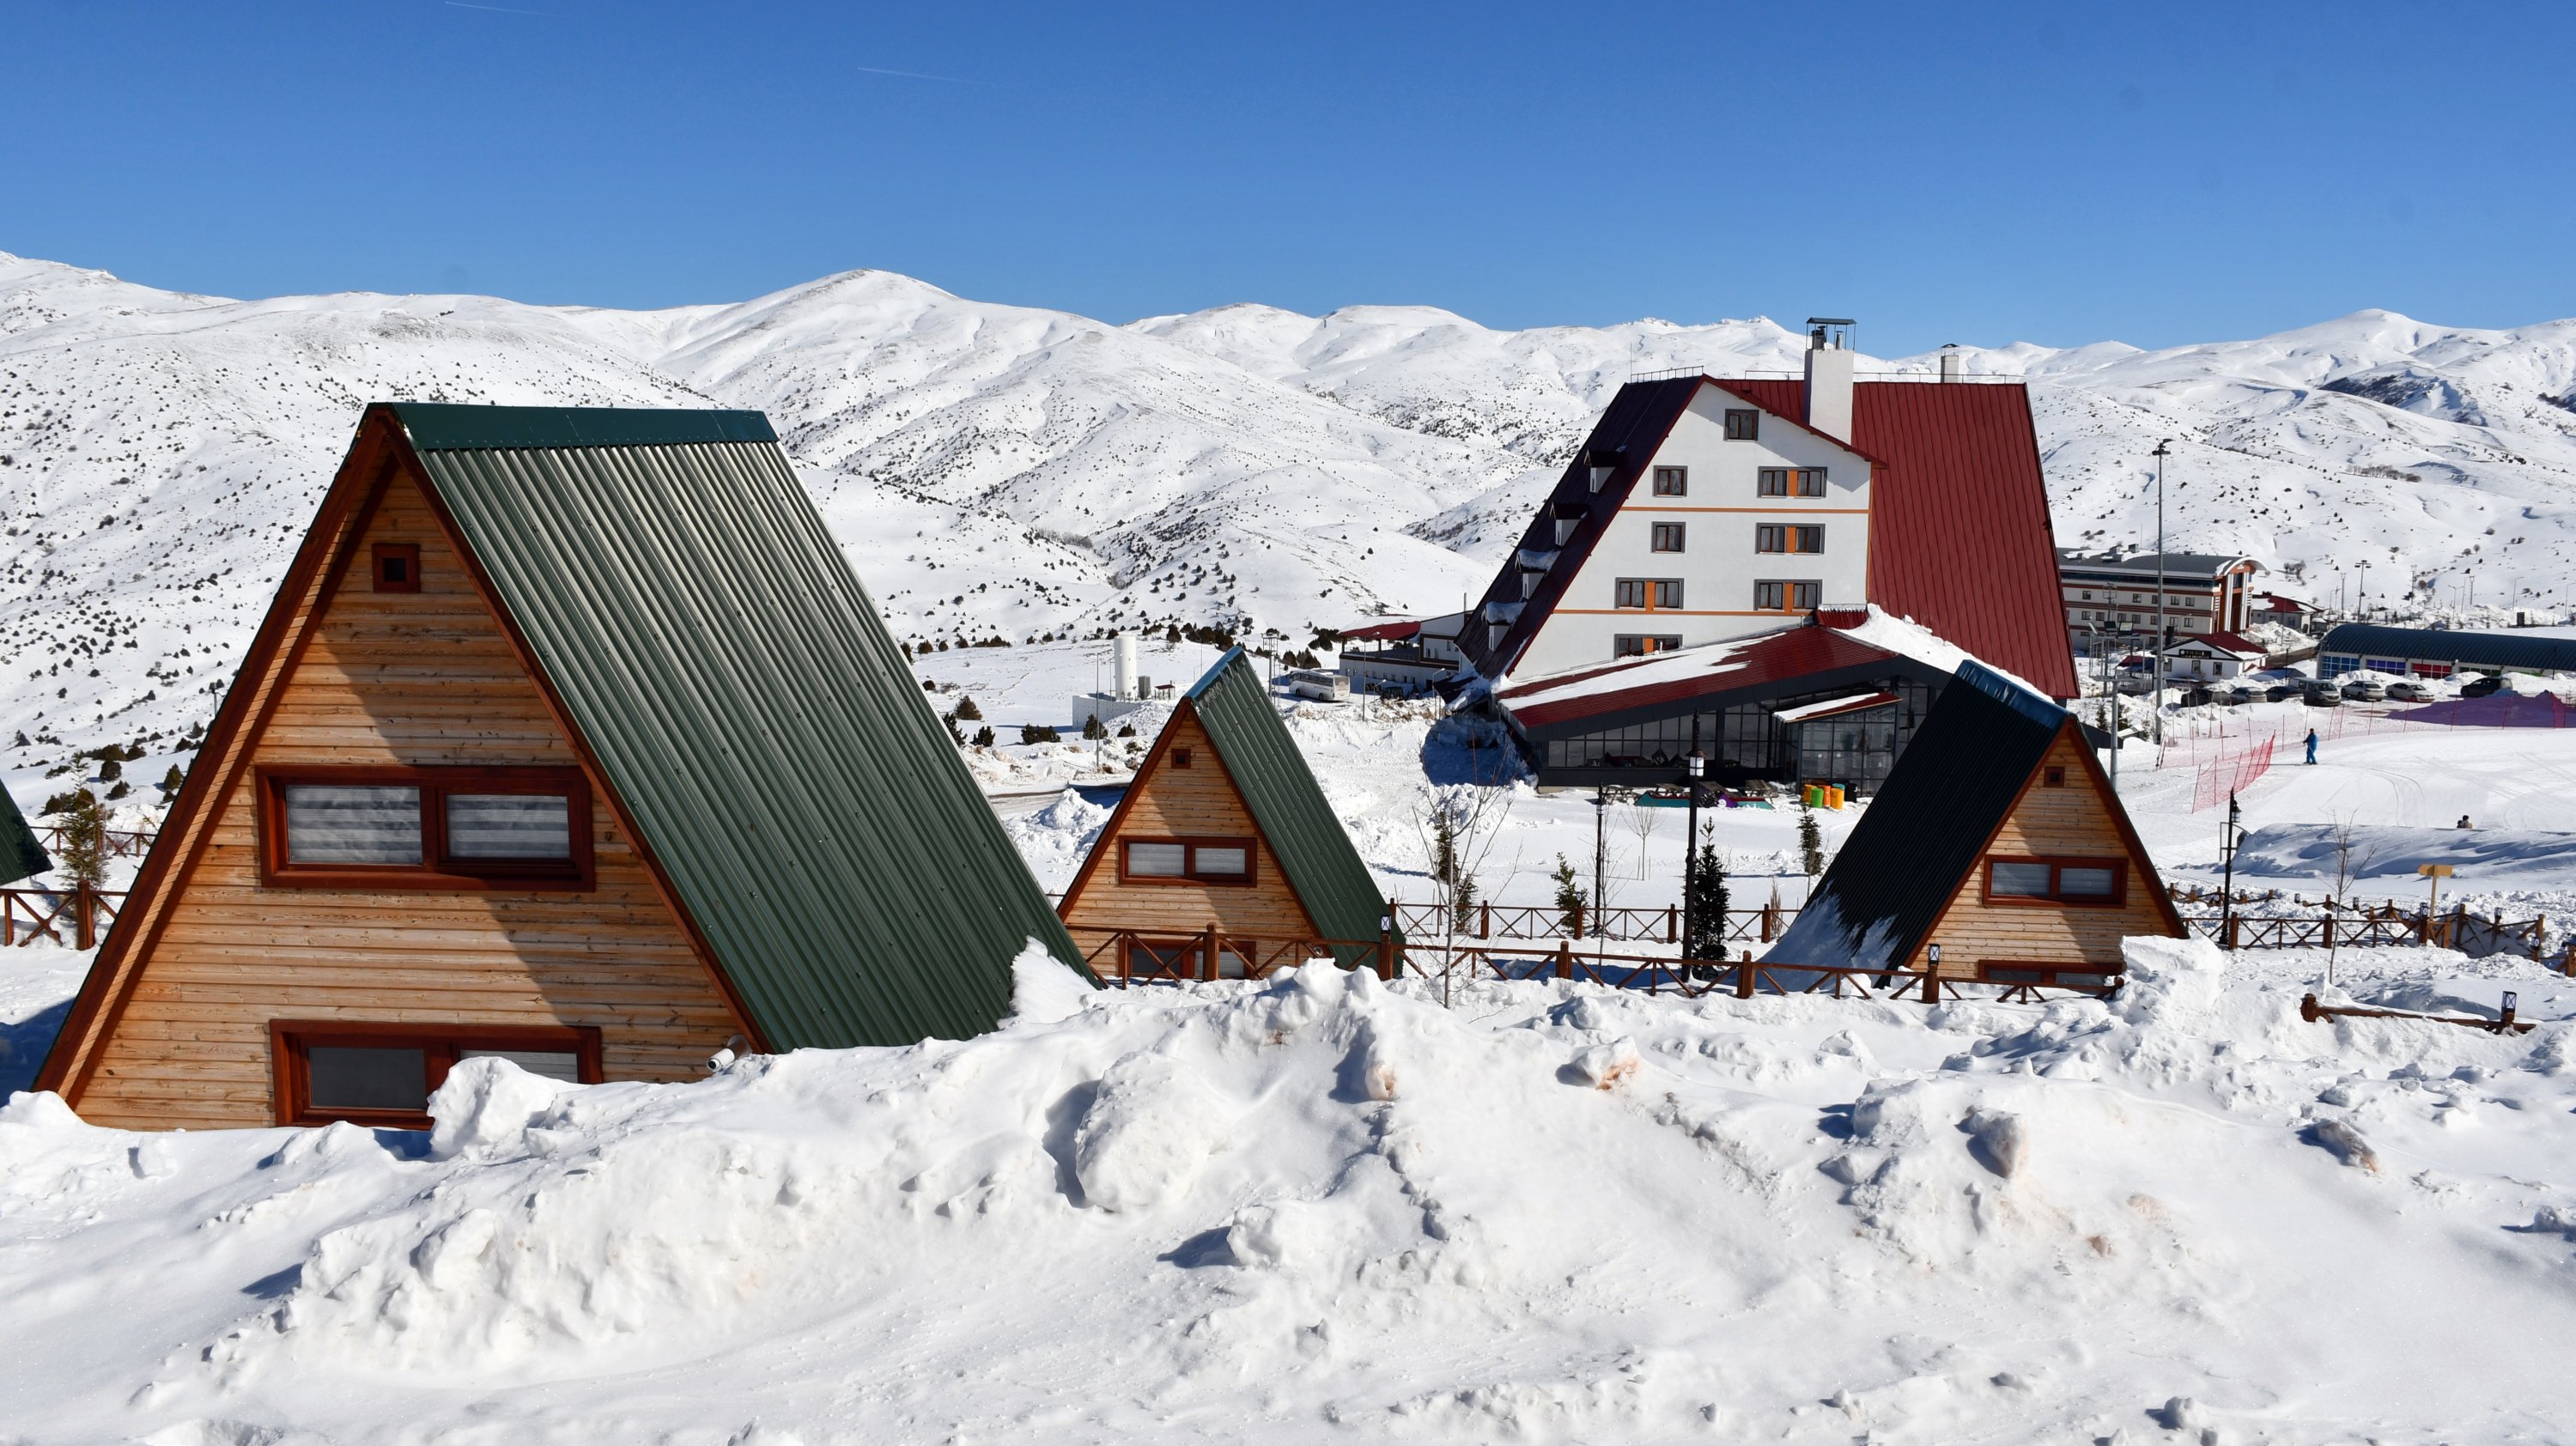 A general view of the self-contained bungalows at Sivas' Yıldız Mountain Winter Sports and Tourism Center, Sivas, central Turkey, Feb. 22, 2022. (AA Photo)